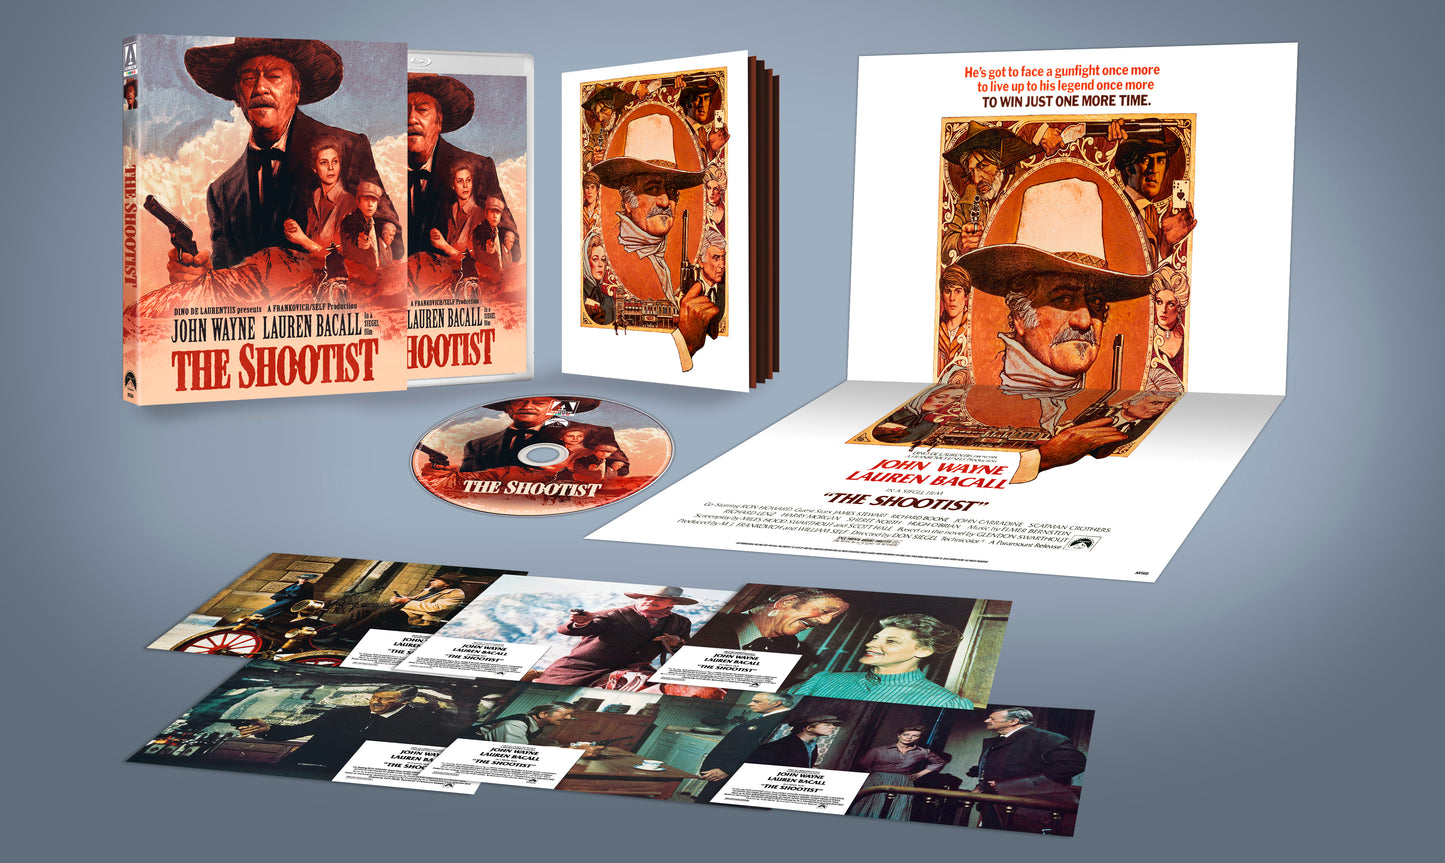 The Shootist Limited Edition Arrow Video Blu-Ray [NEW] [SLIPCOVER]